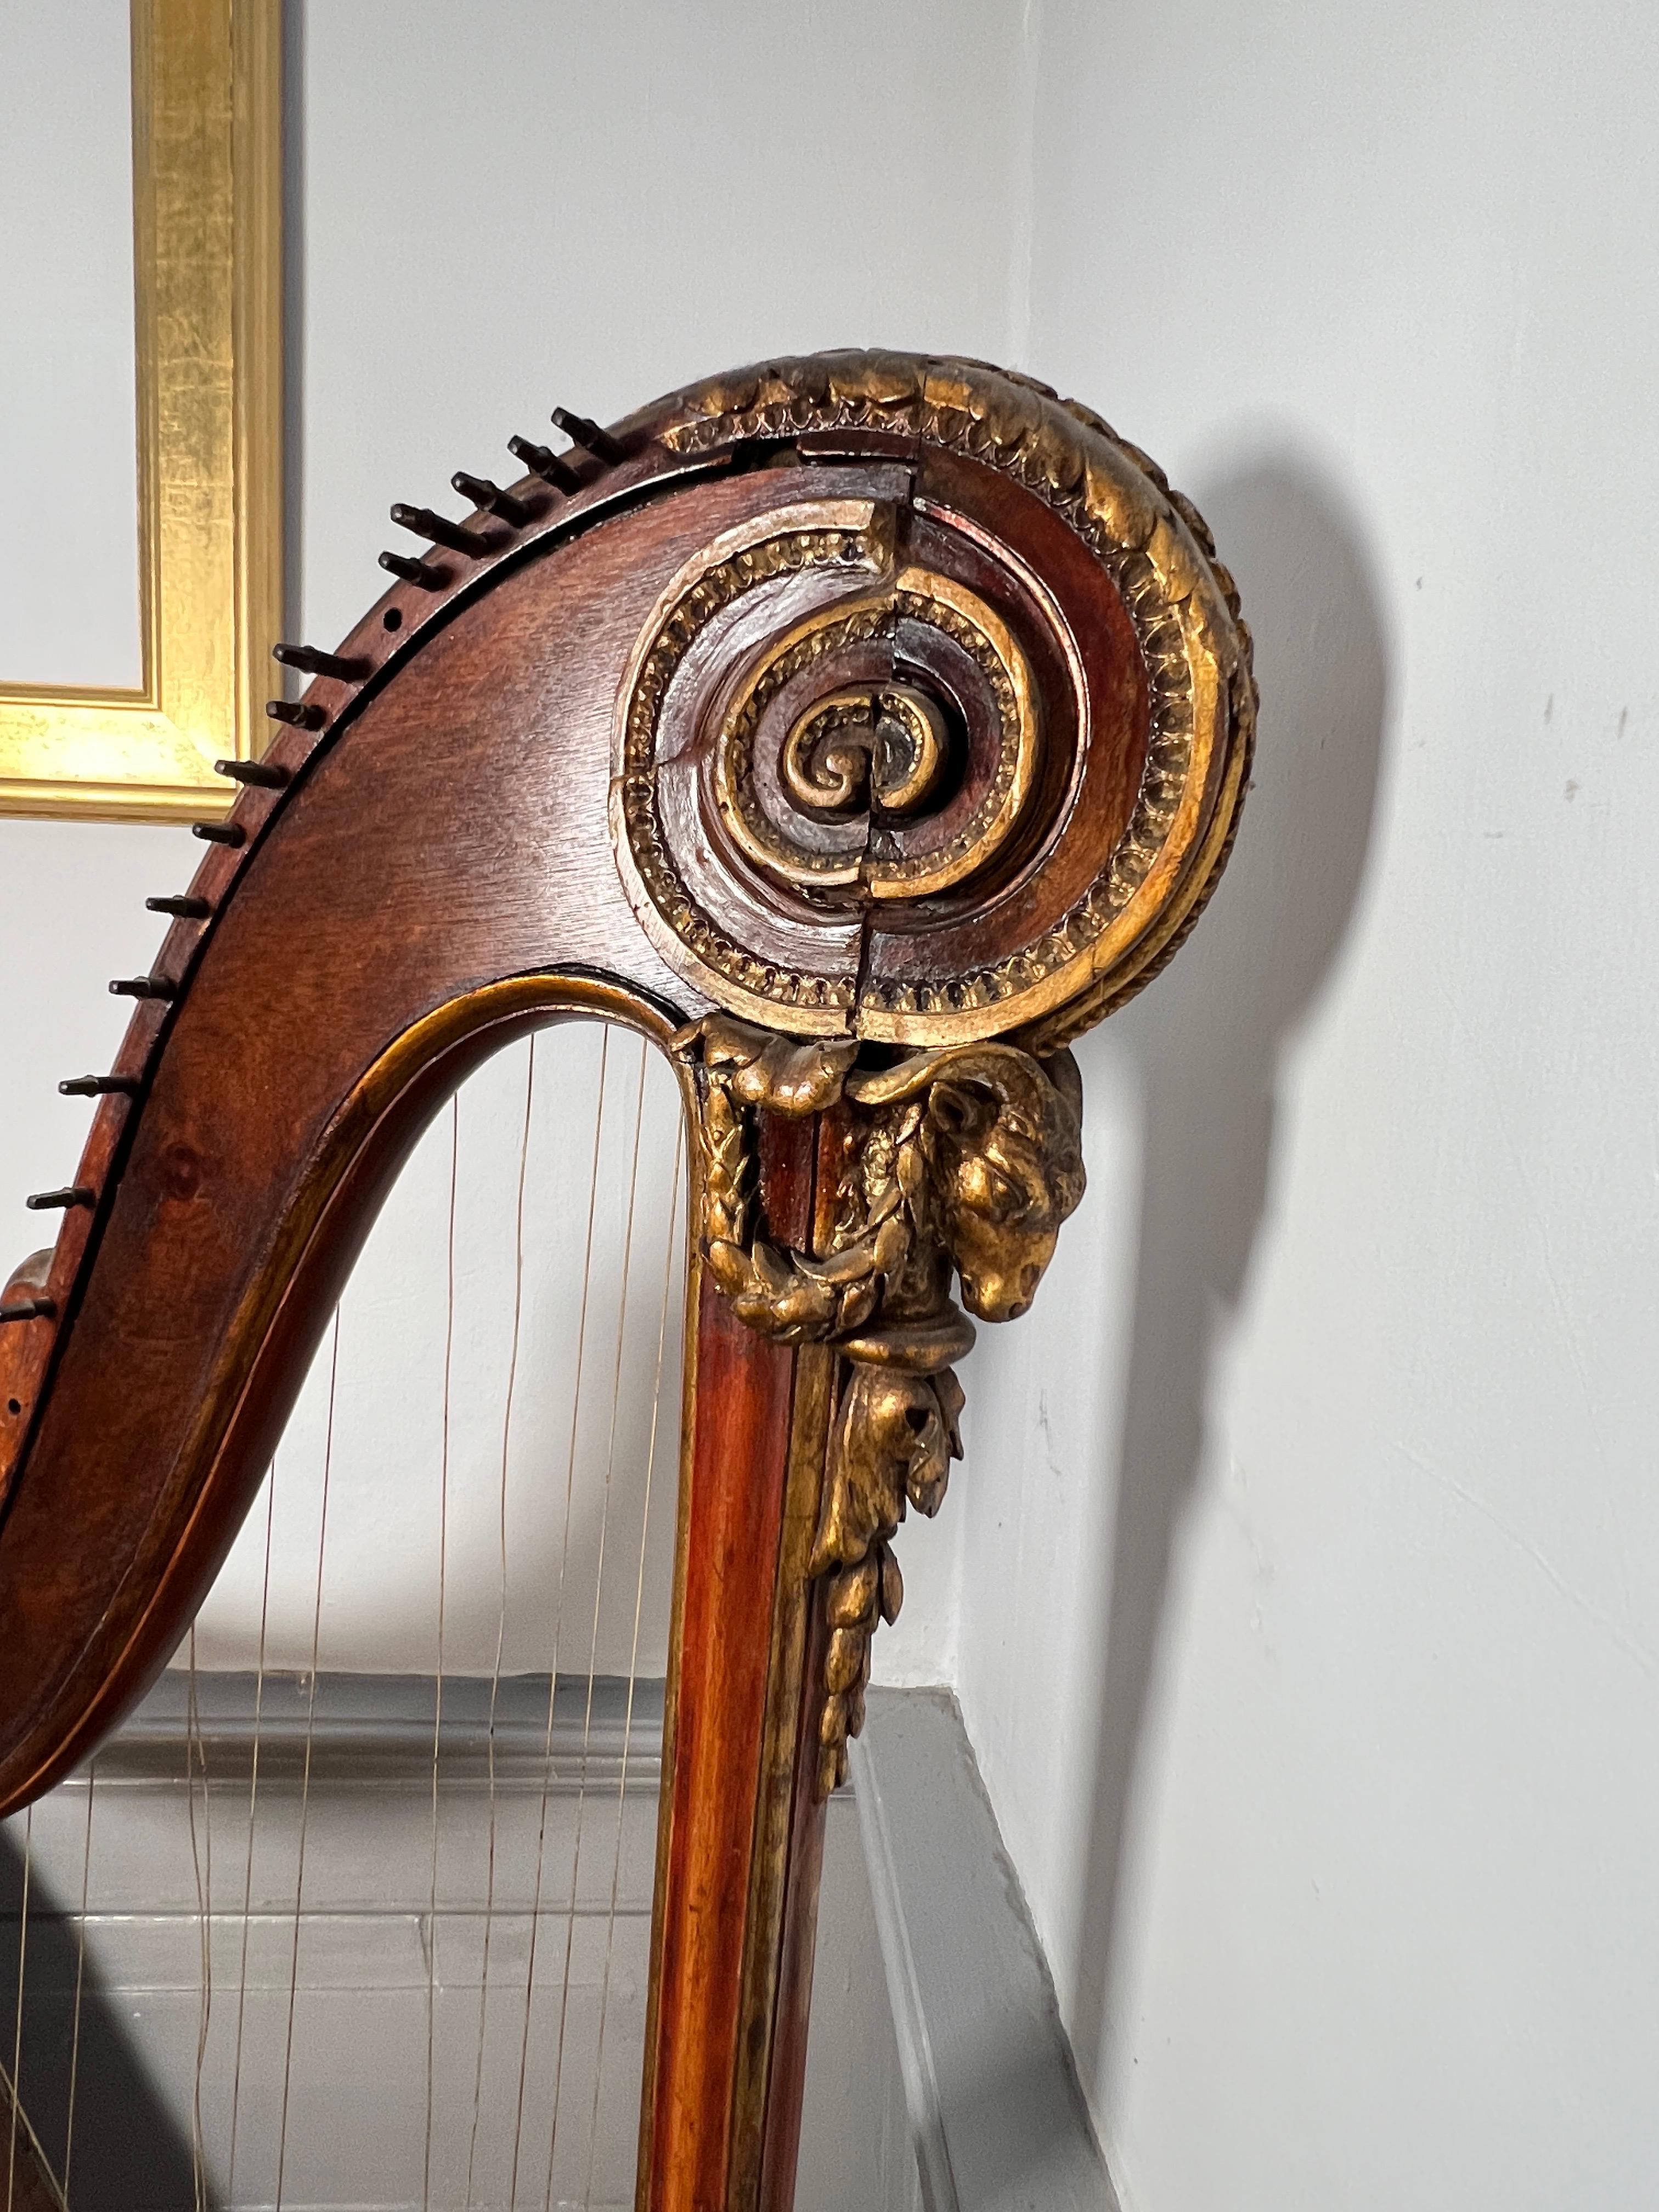 This is a completely unrestored but extremely original example of of a 18th century harp by Cousineau pere et fils.
Cousineau improved the harp’s pedal mechanism which shortens the playing length of the strings and makes it possible to play